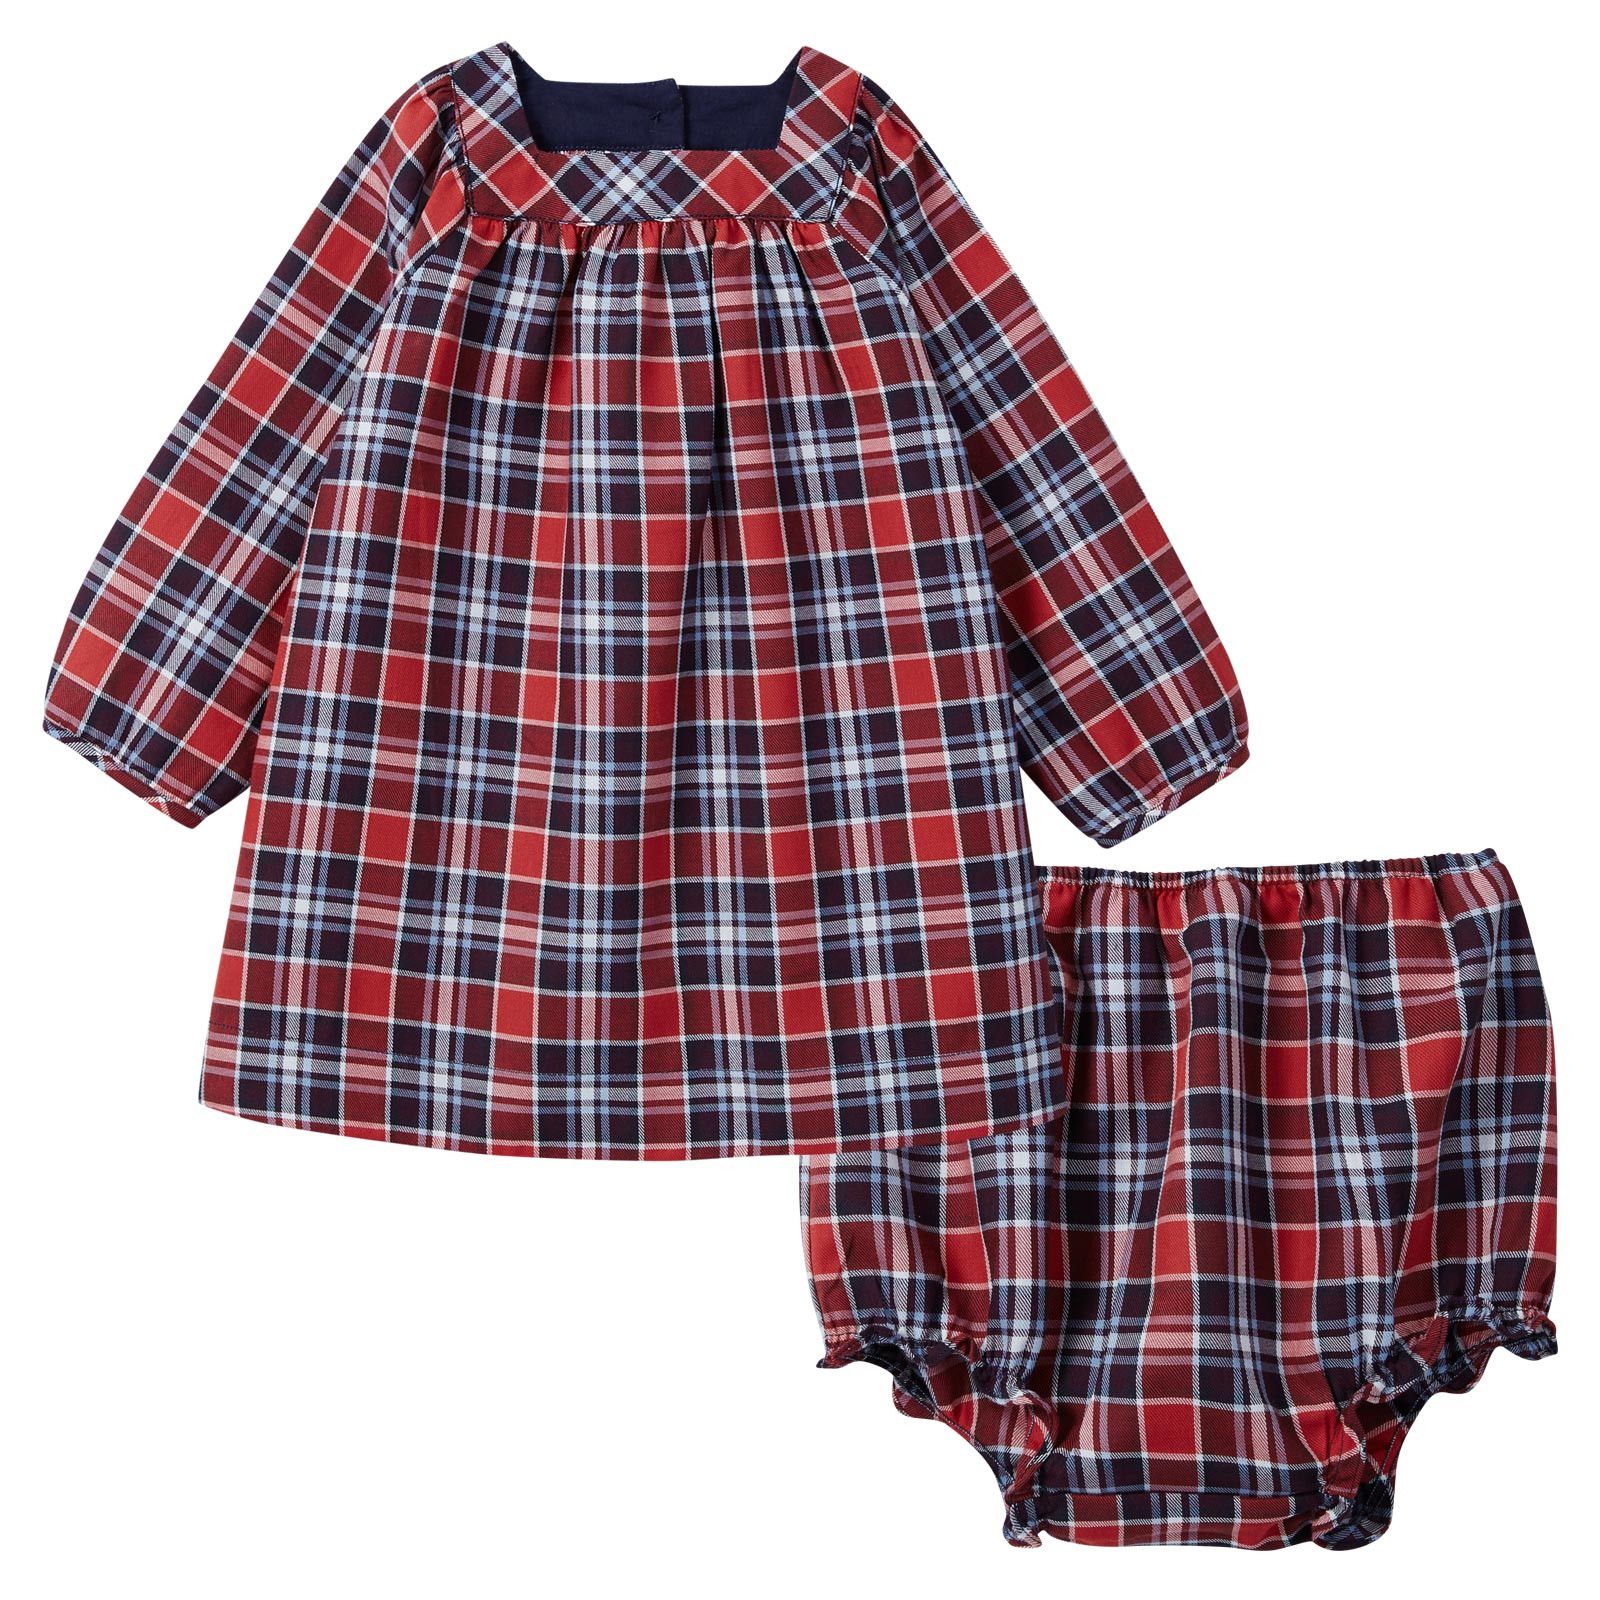 Baby Girls Red Tartan Dress With Bloomers - CÉMAROSE | Children's Fashion Store - 1